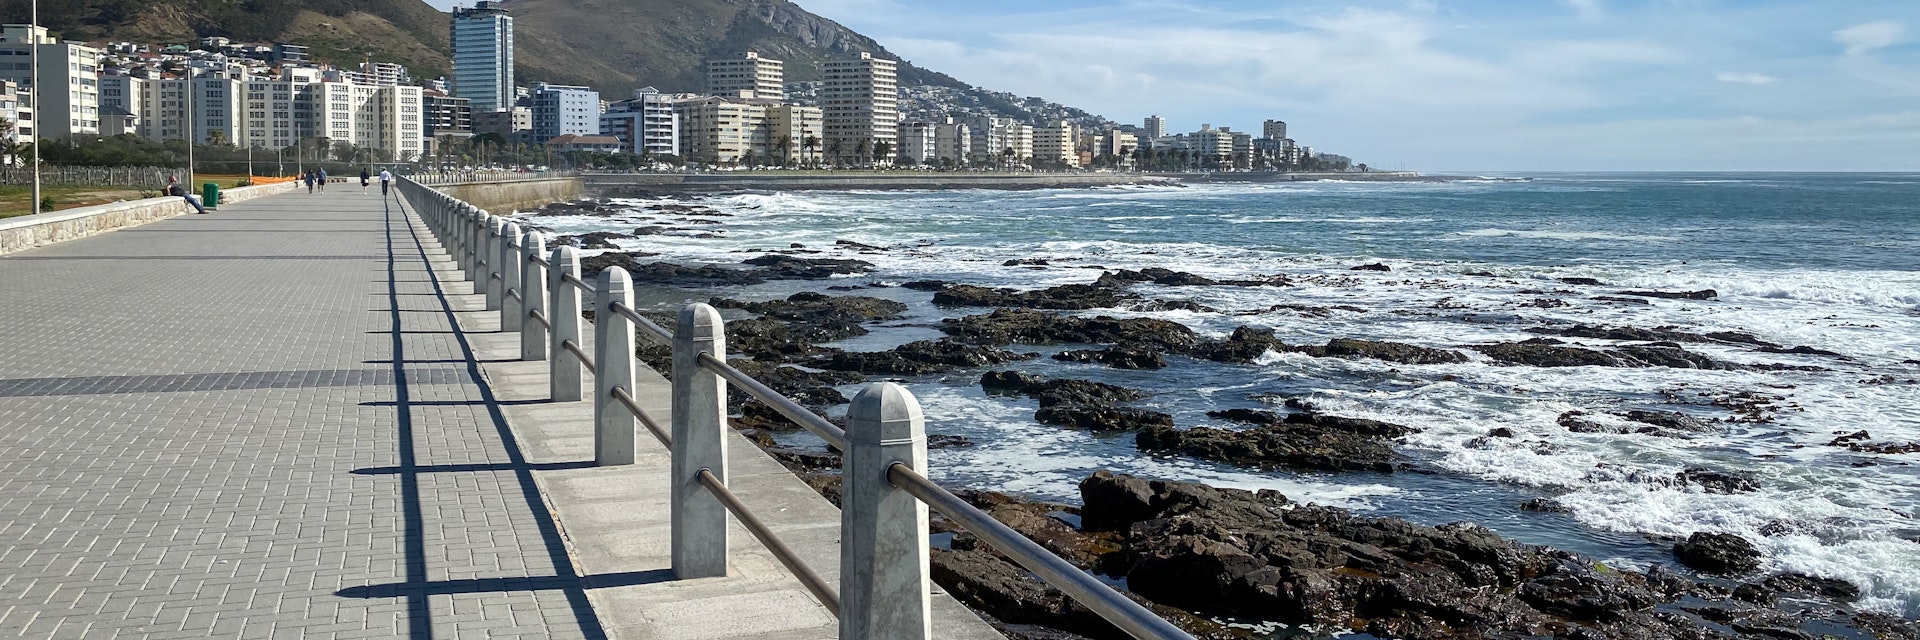 Scenic view of Sea Point Promenade, Cape Town, South Africa.